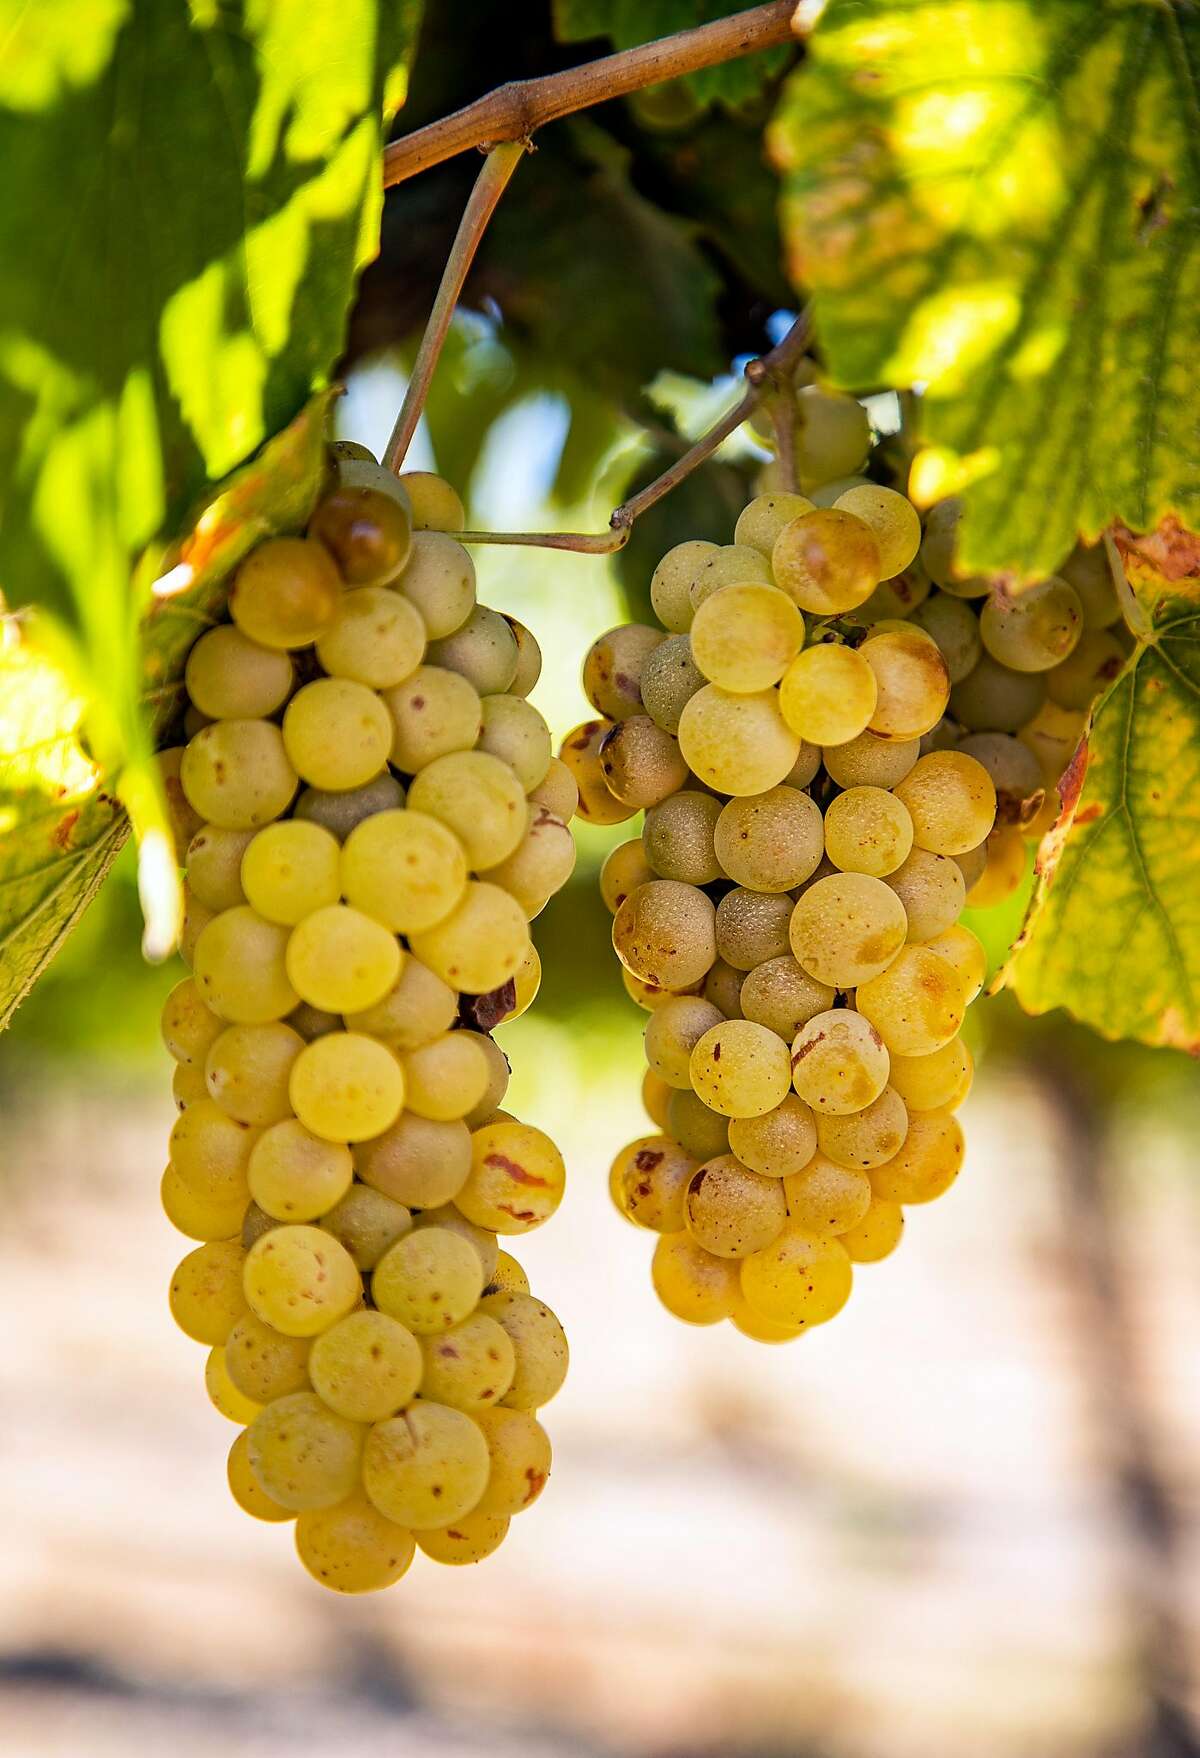 Chardonnay grapes grow at the Johnson Vineyard Company on Wednesday, October 2, 2019 in King City, Calif.